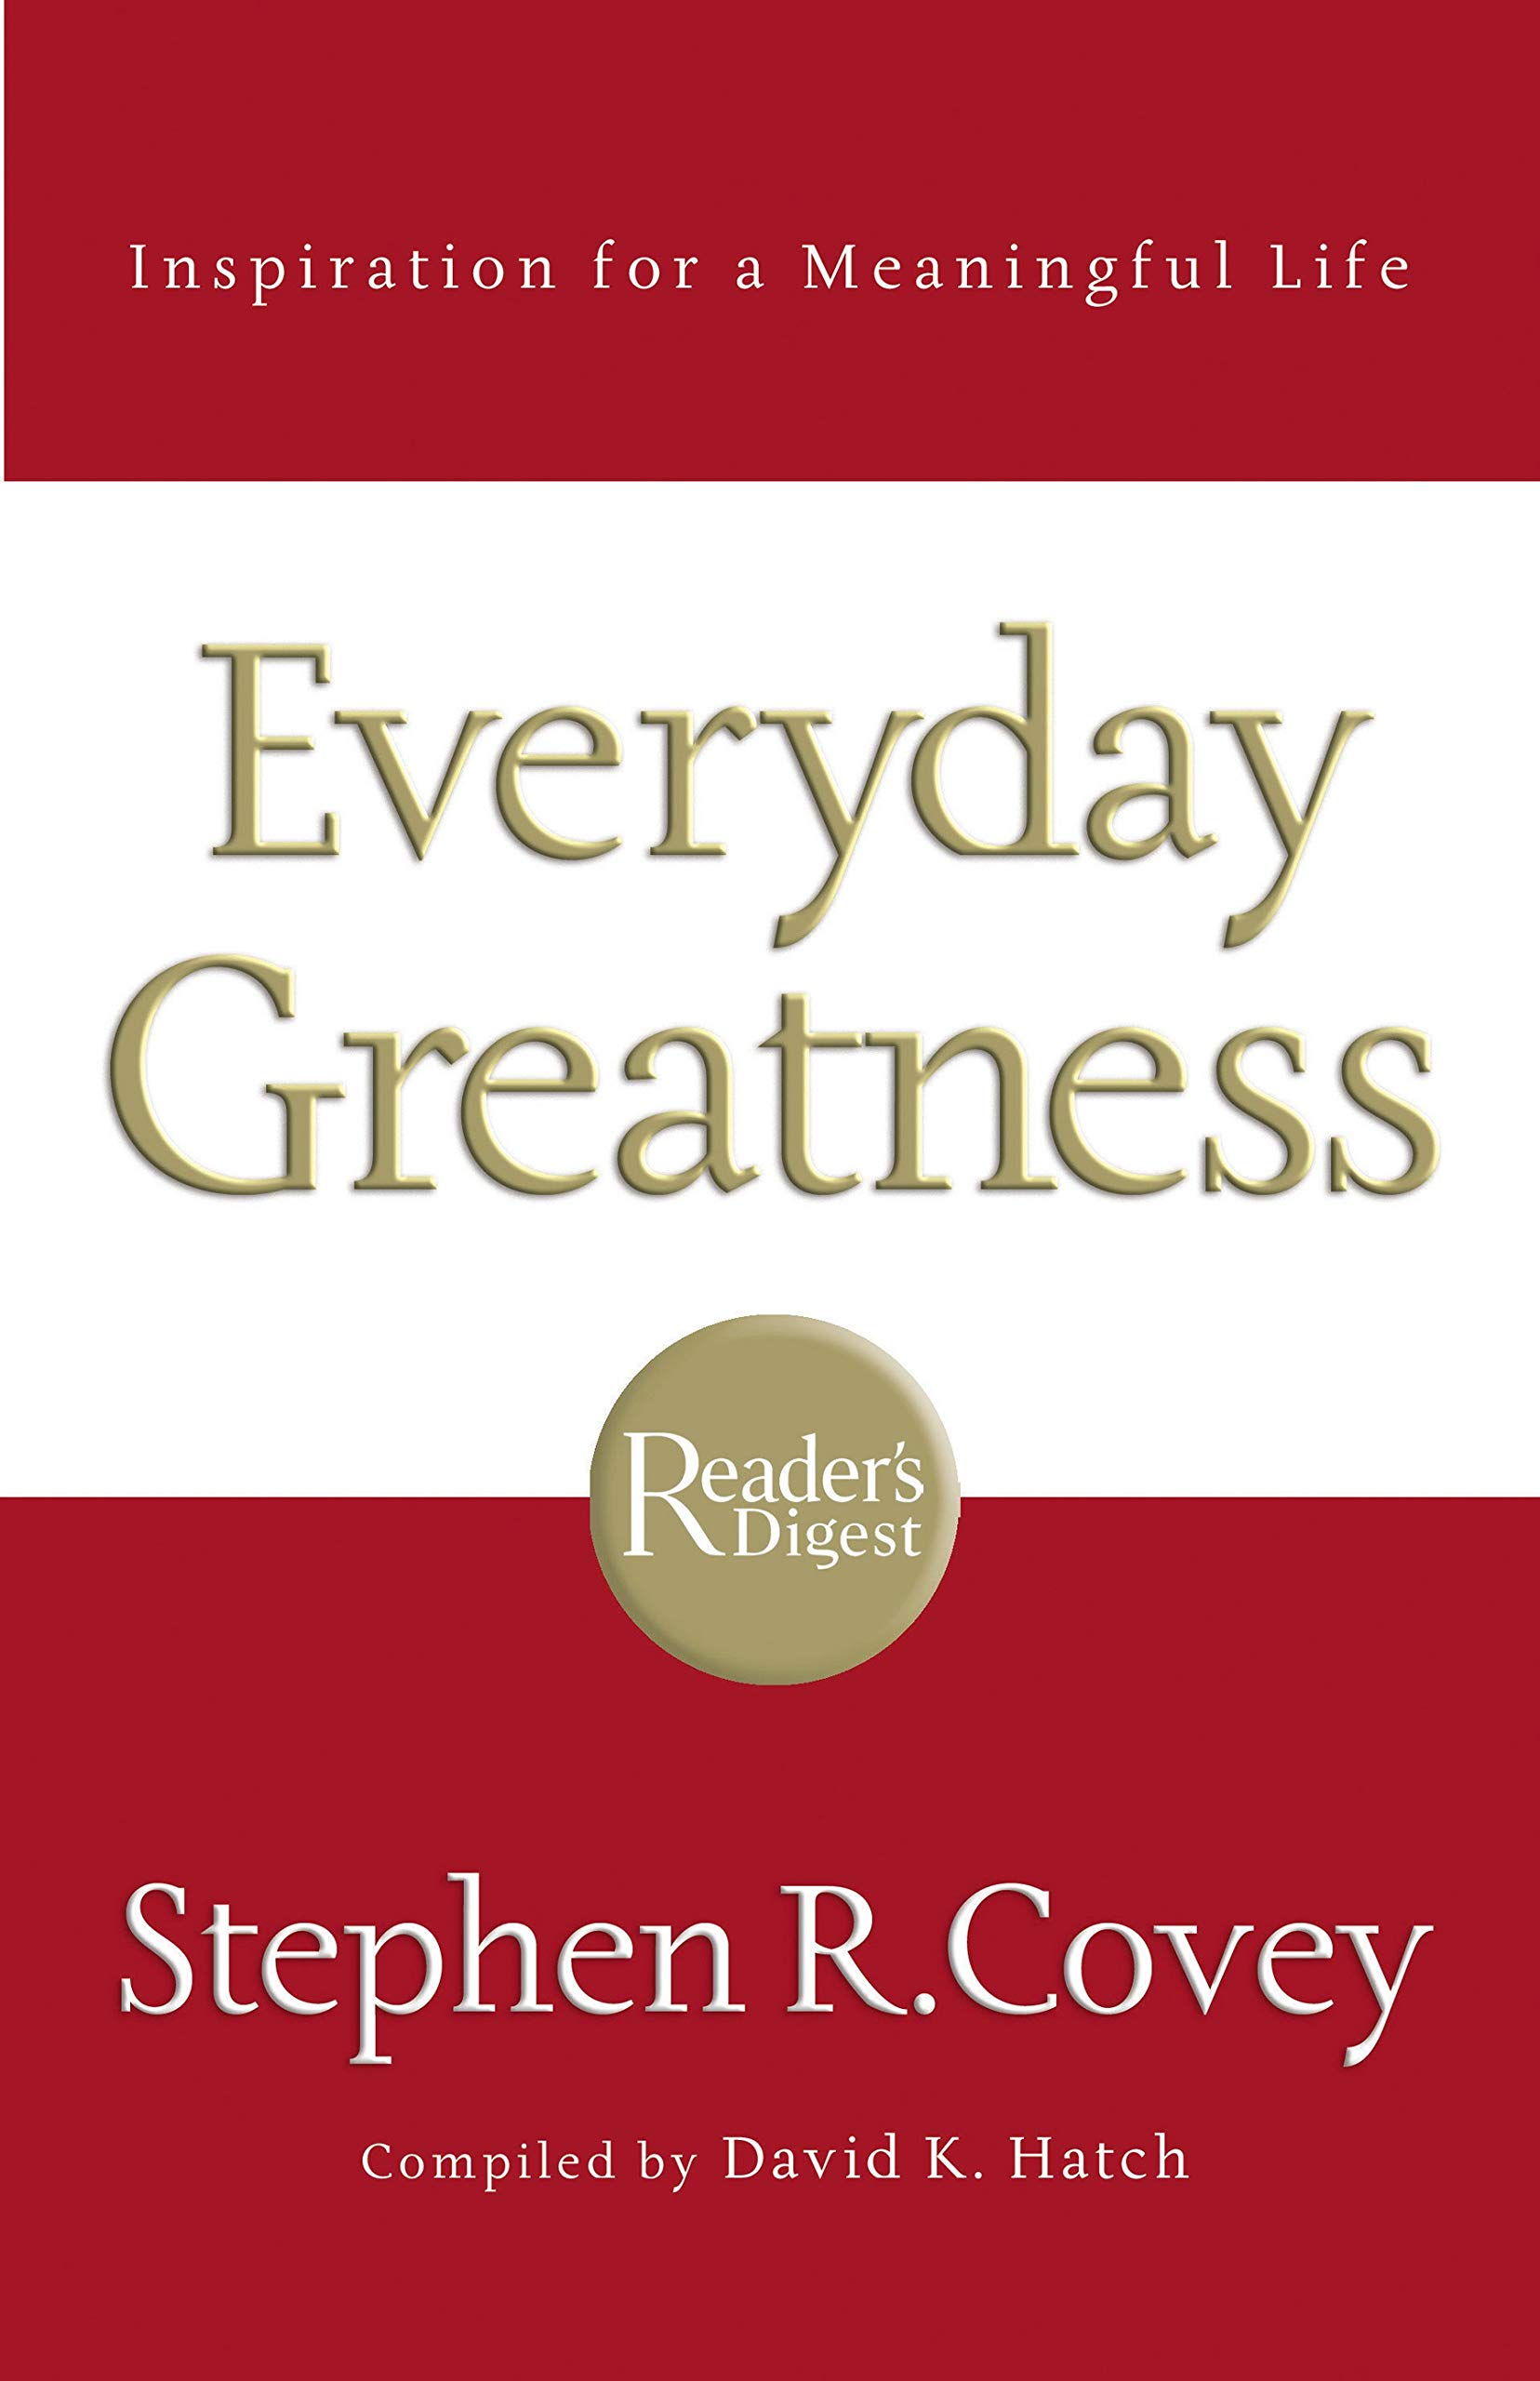 Everyday Greatness by Stephen R Covey, David K Hatch